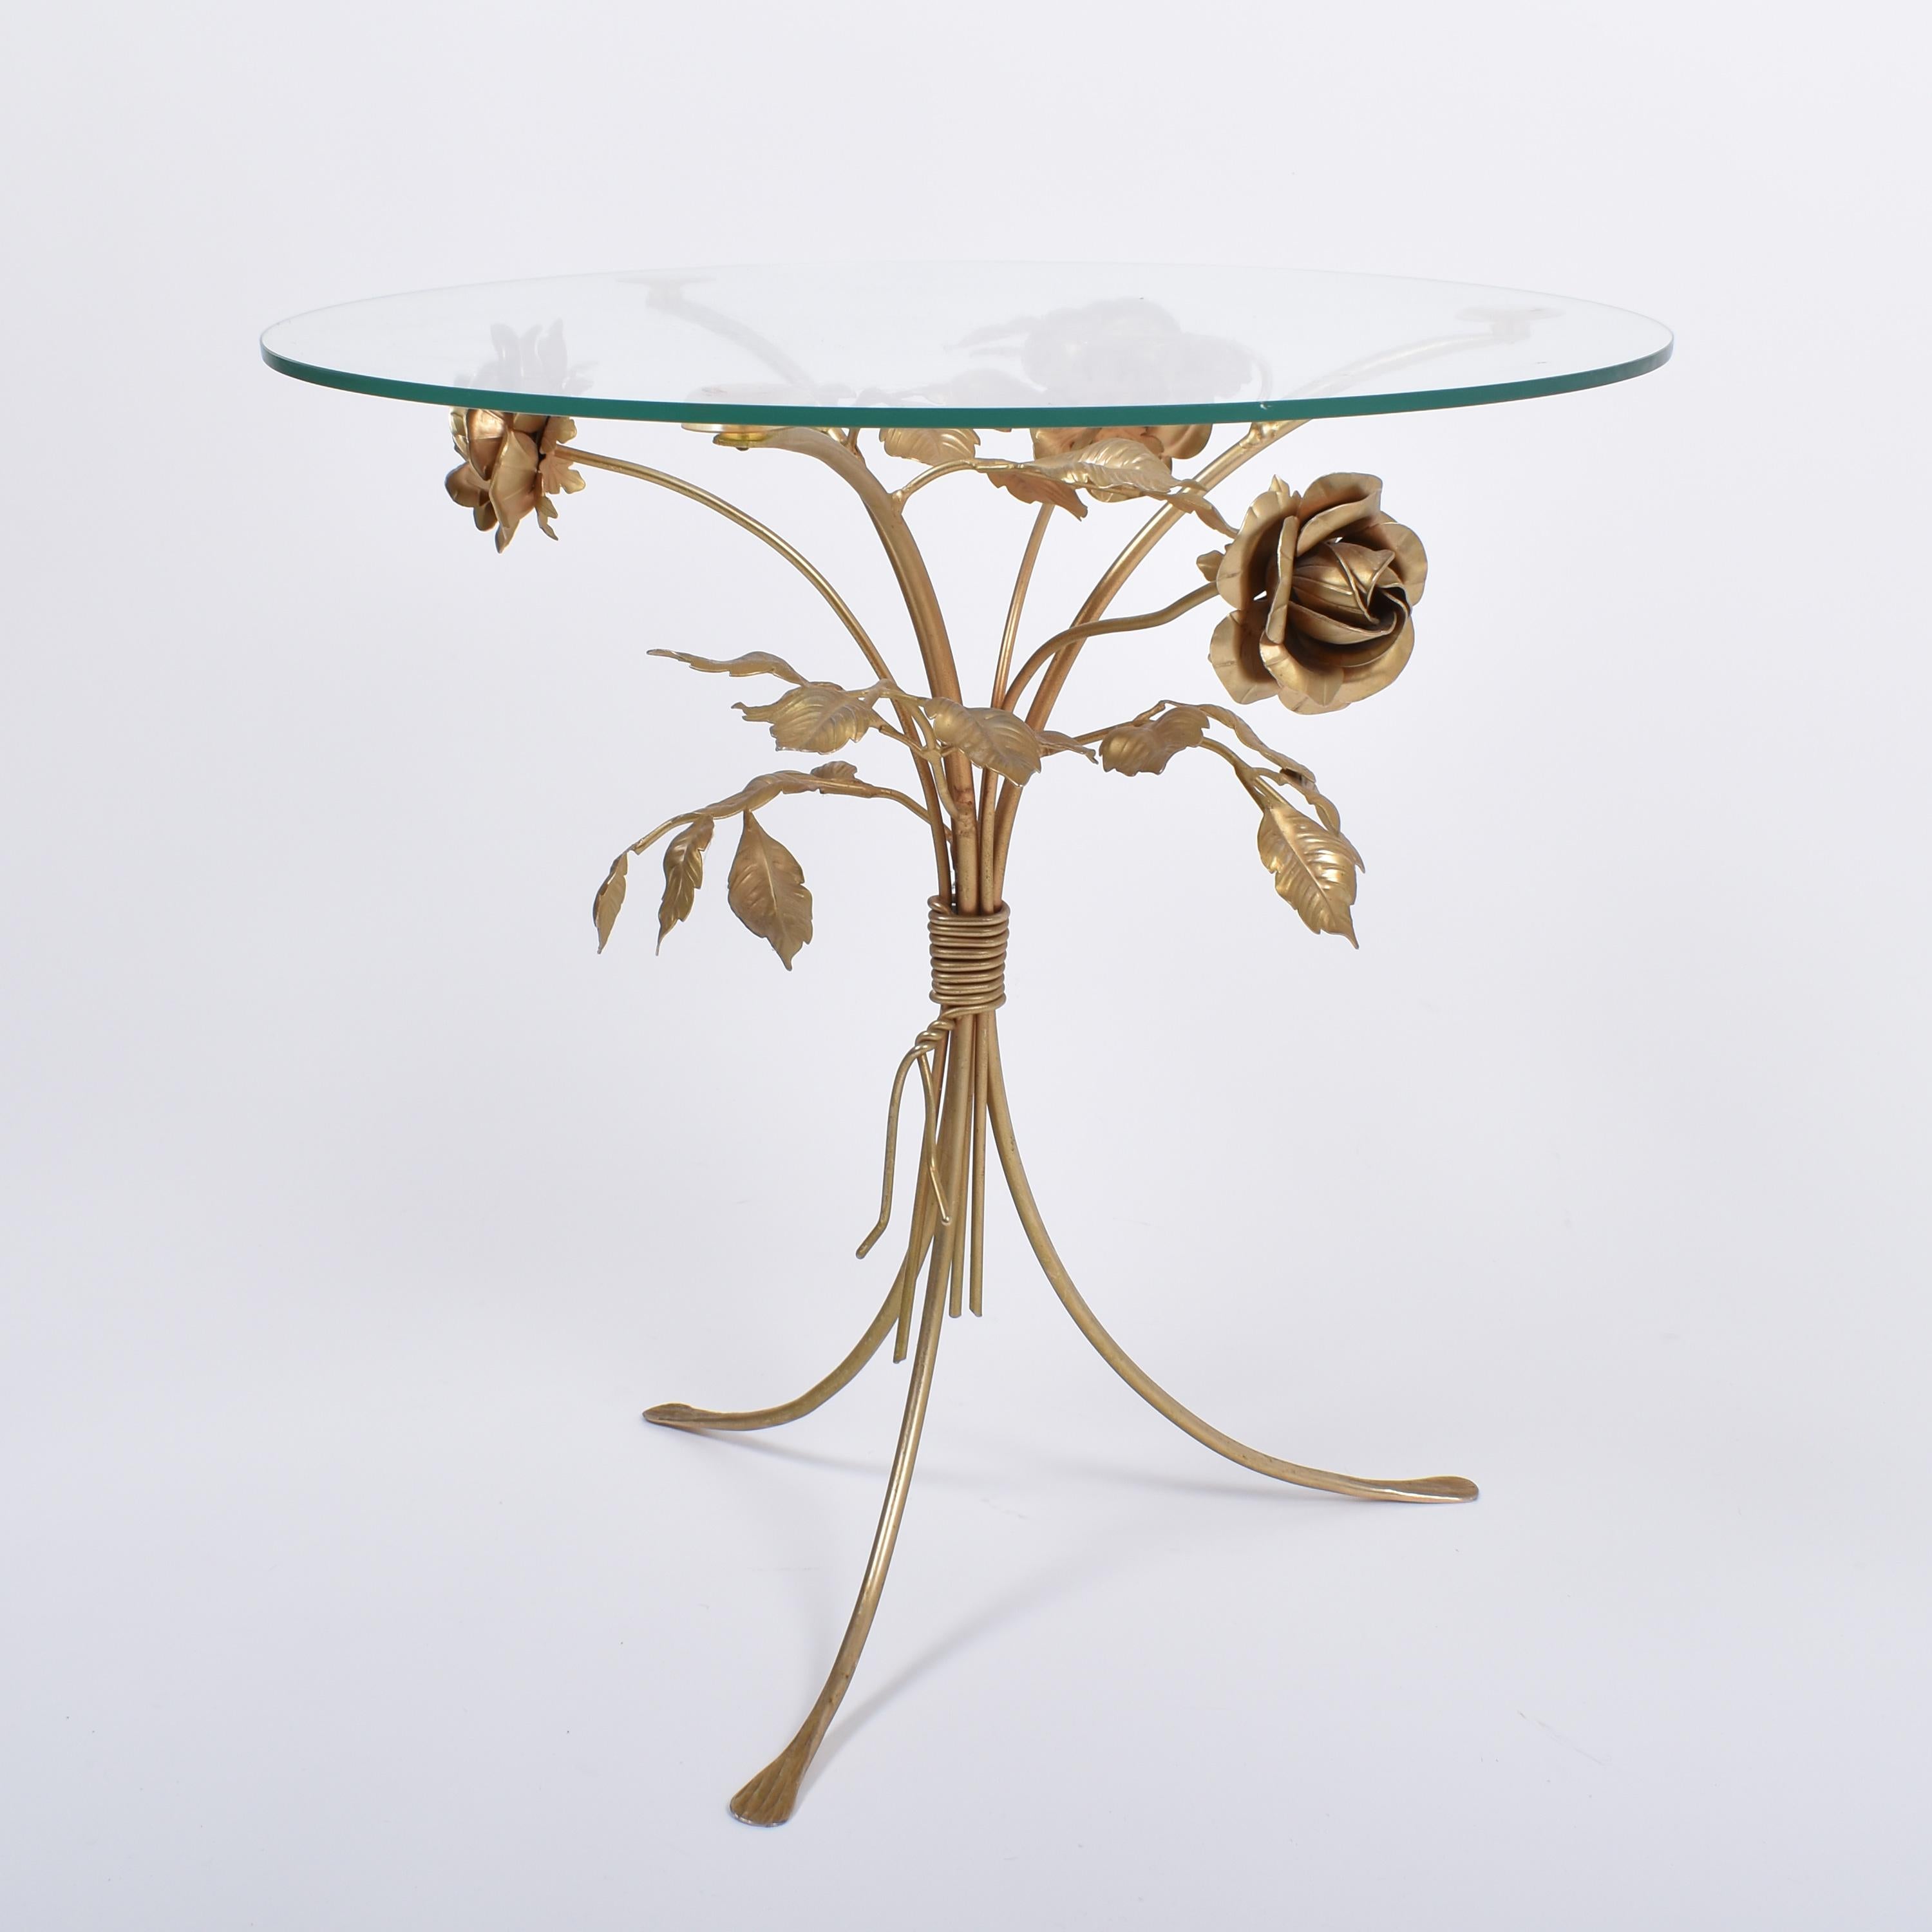 Delicate floral table, with gilt roses and leaves.
This guéridon is the work of the well known Hand Kögl, German master of floral furniture.
It is in very good condition, with a glass tabletop.